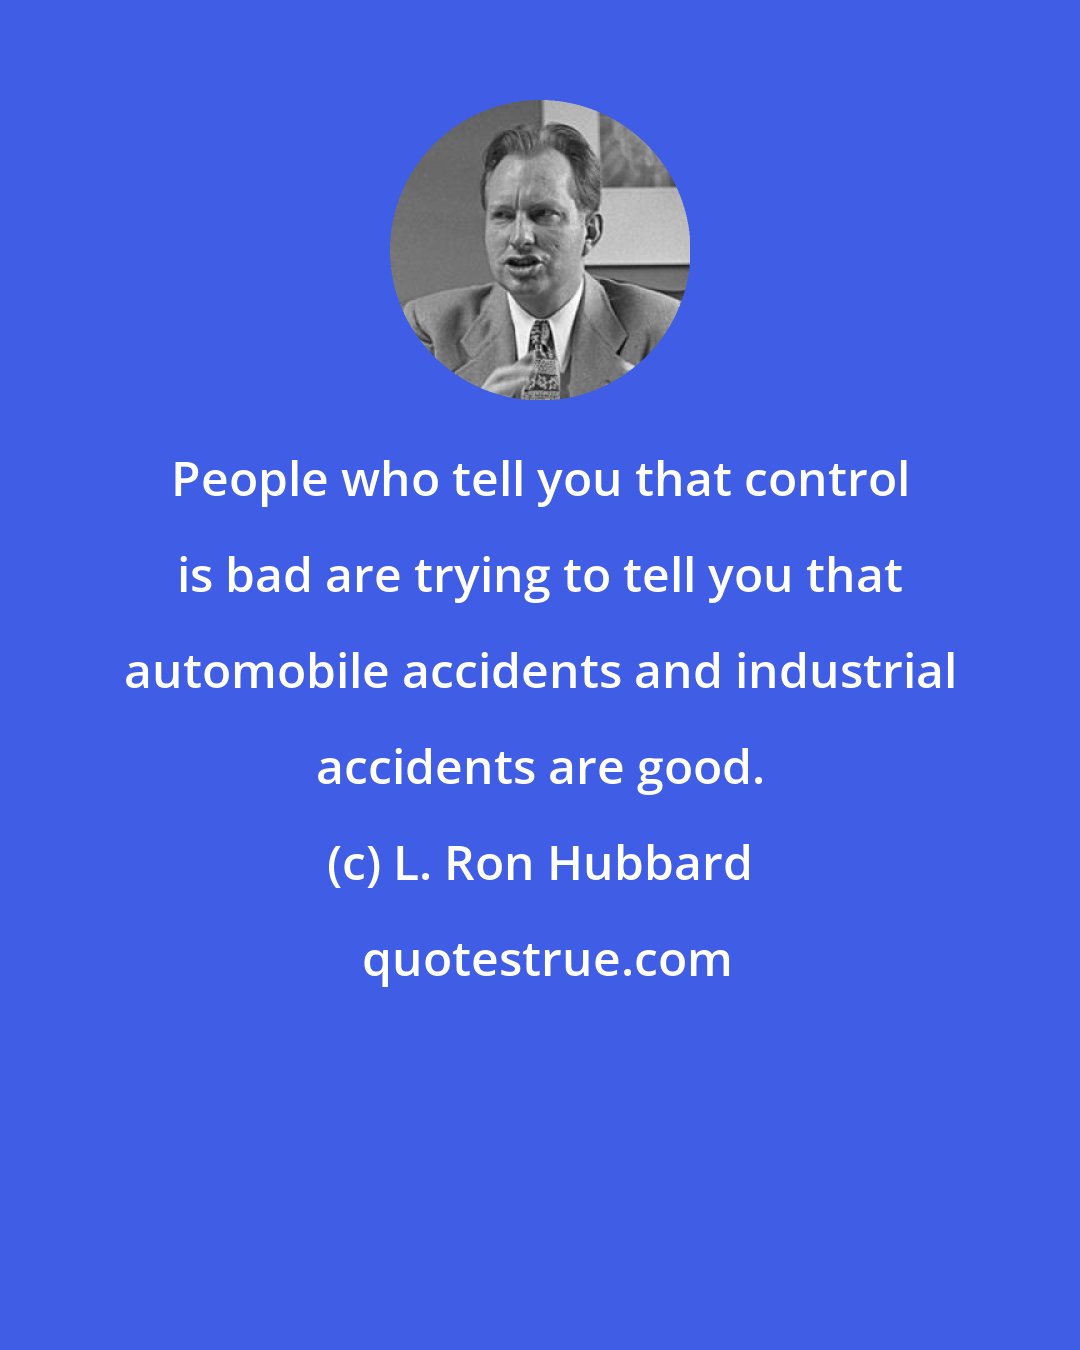 L. Ron Hubbard: People who tell you that control is bad are trying to tell you that automobile accidents and industrial accidents are good.